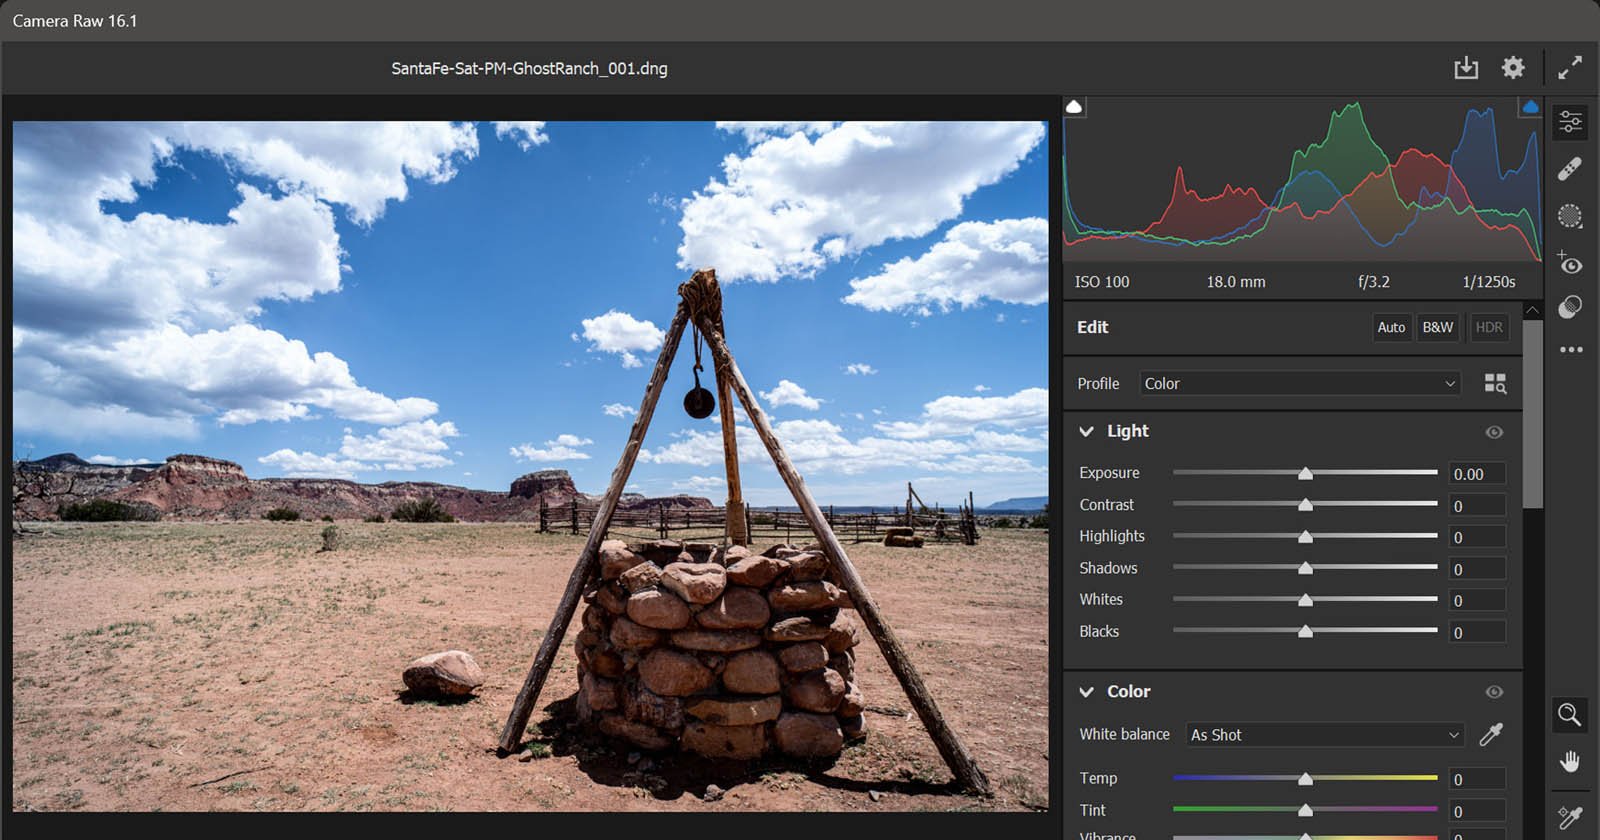 How to Use the Camera Raw Filter in Photoshop